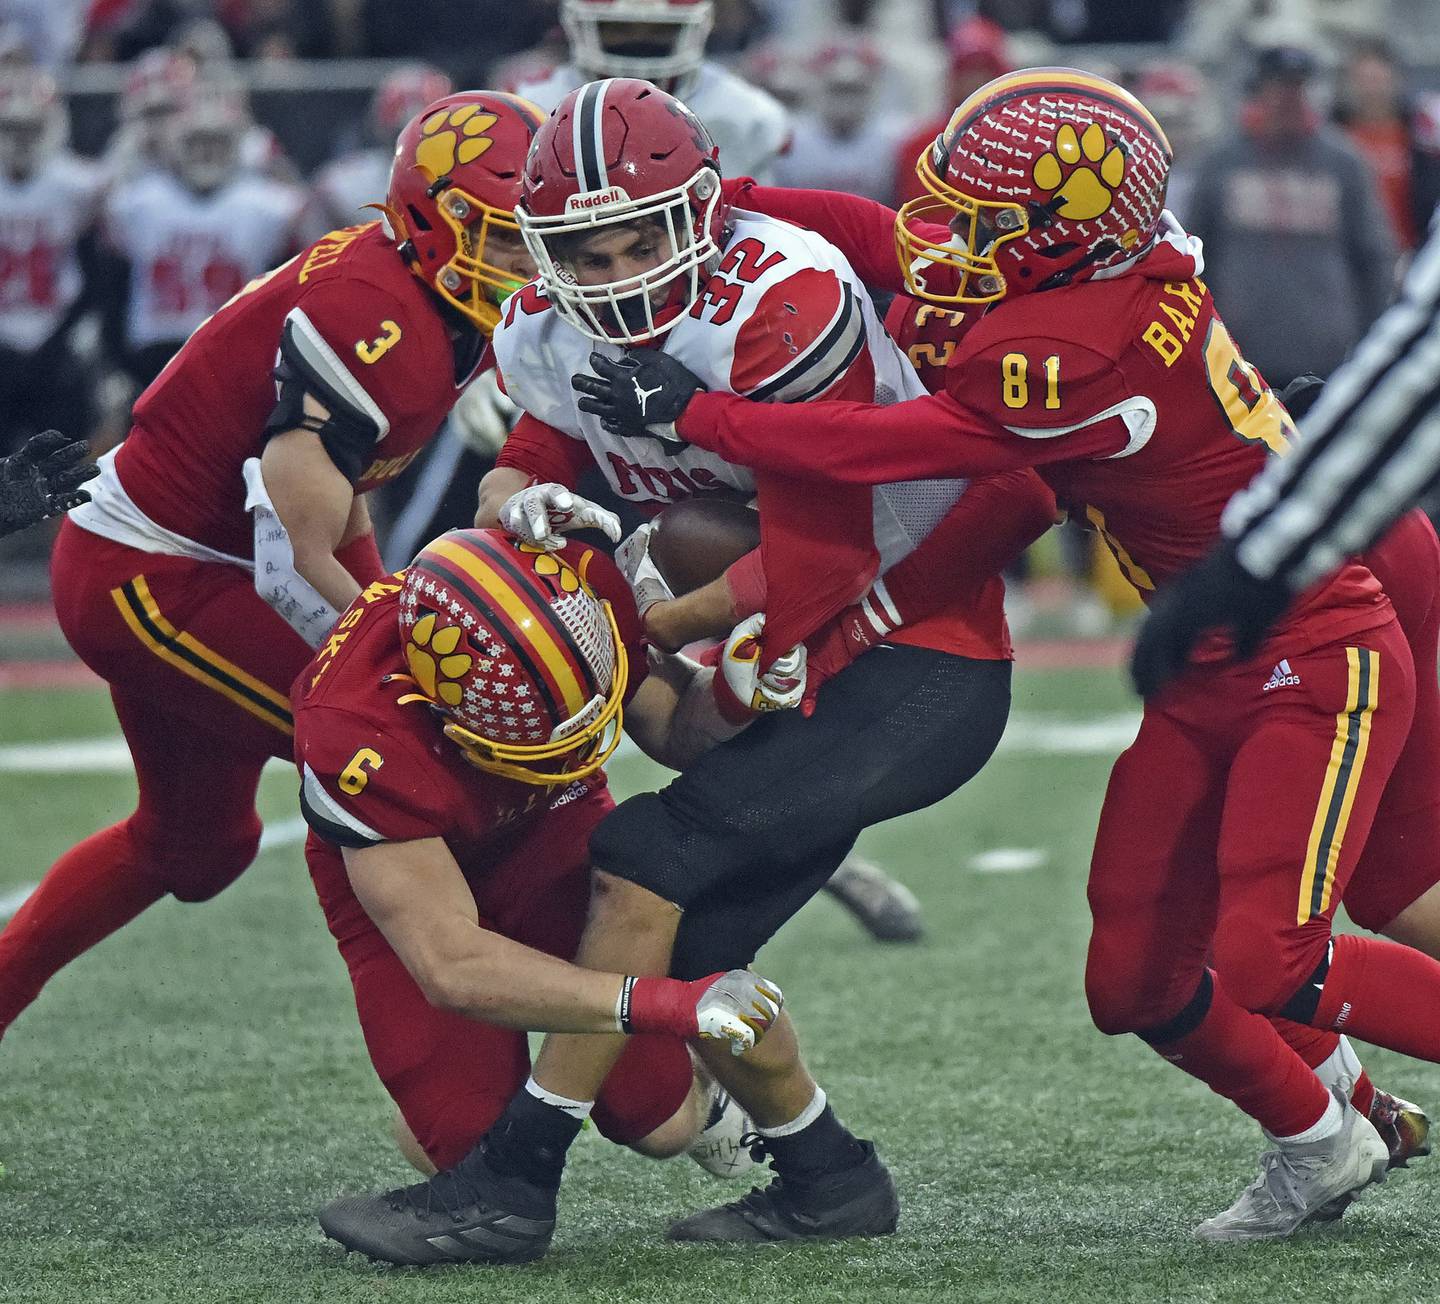 Yorkville's Gio Zeman is brought down by Batavia's Jack Sadowsky and Joey Barbush after a short gain during a Class 7A state quarterfinal game in Batavia on Saturday, Nov. 12, 2022.